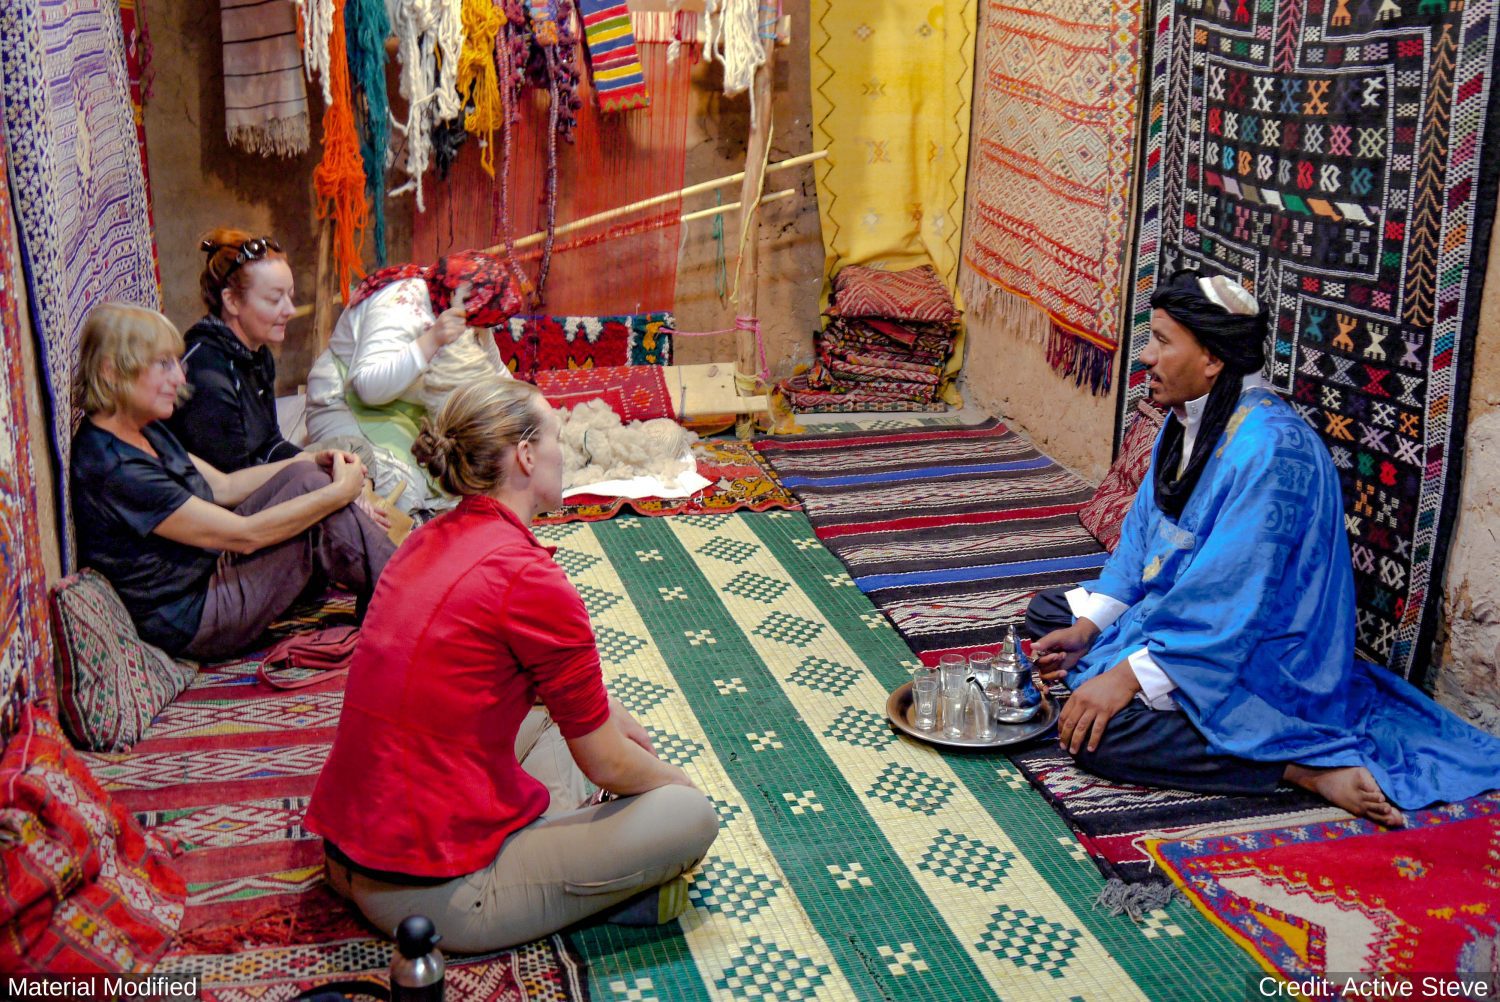 Morocco: See & Experience it ALL in 11 Days, 1st Class Custom Tours